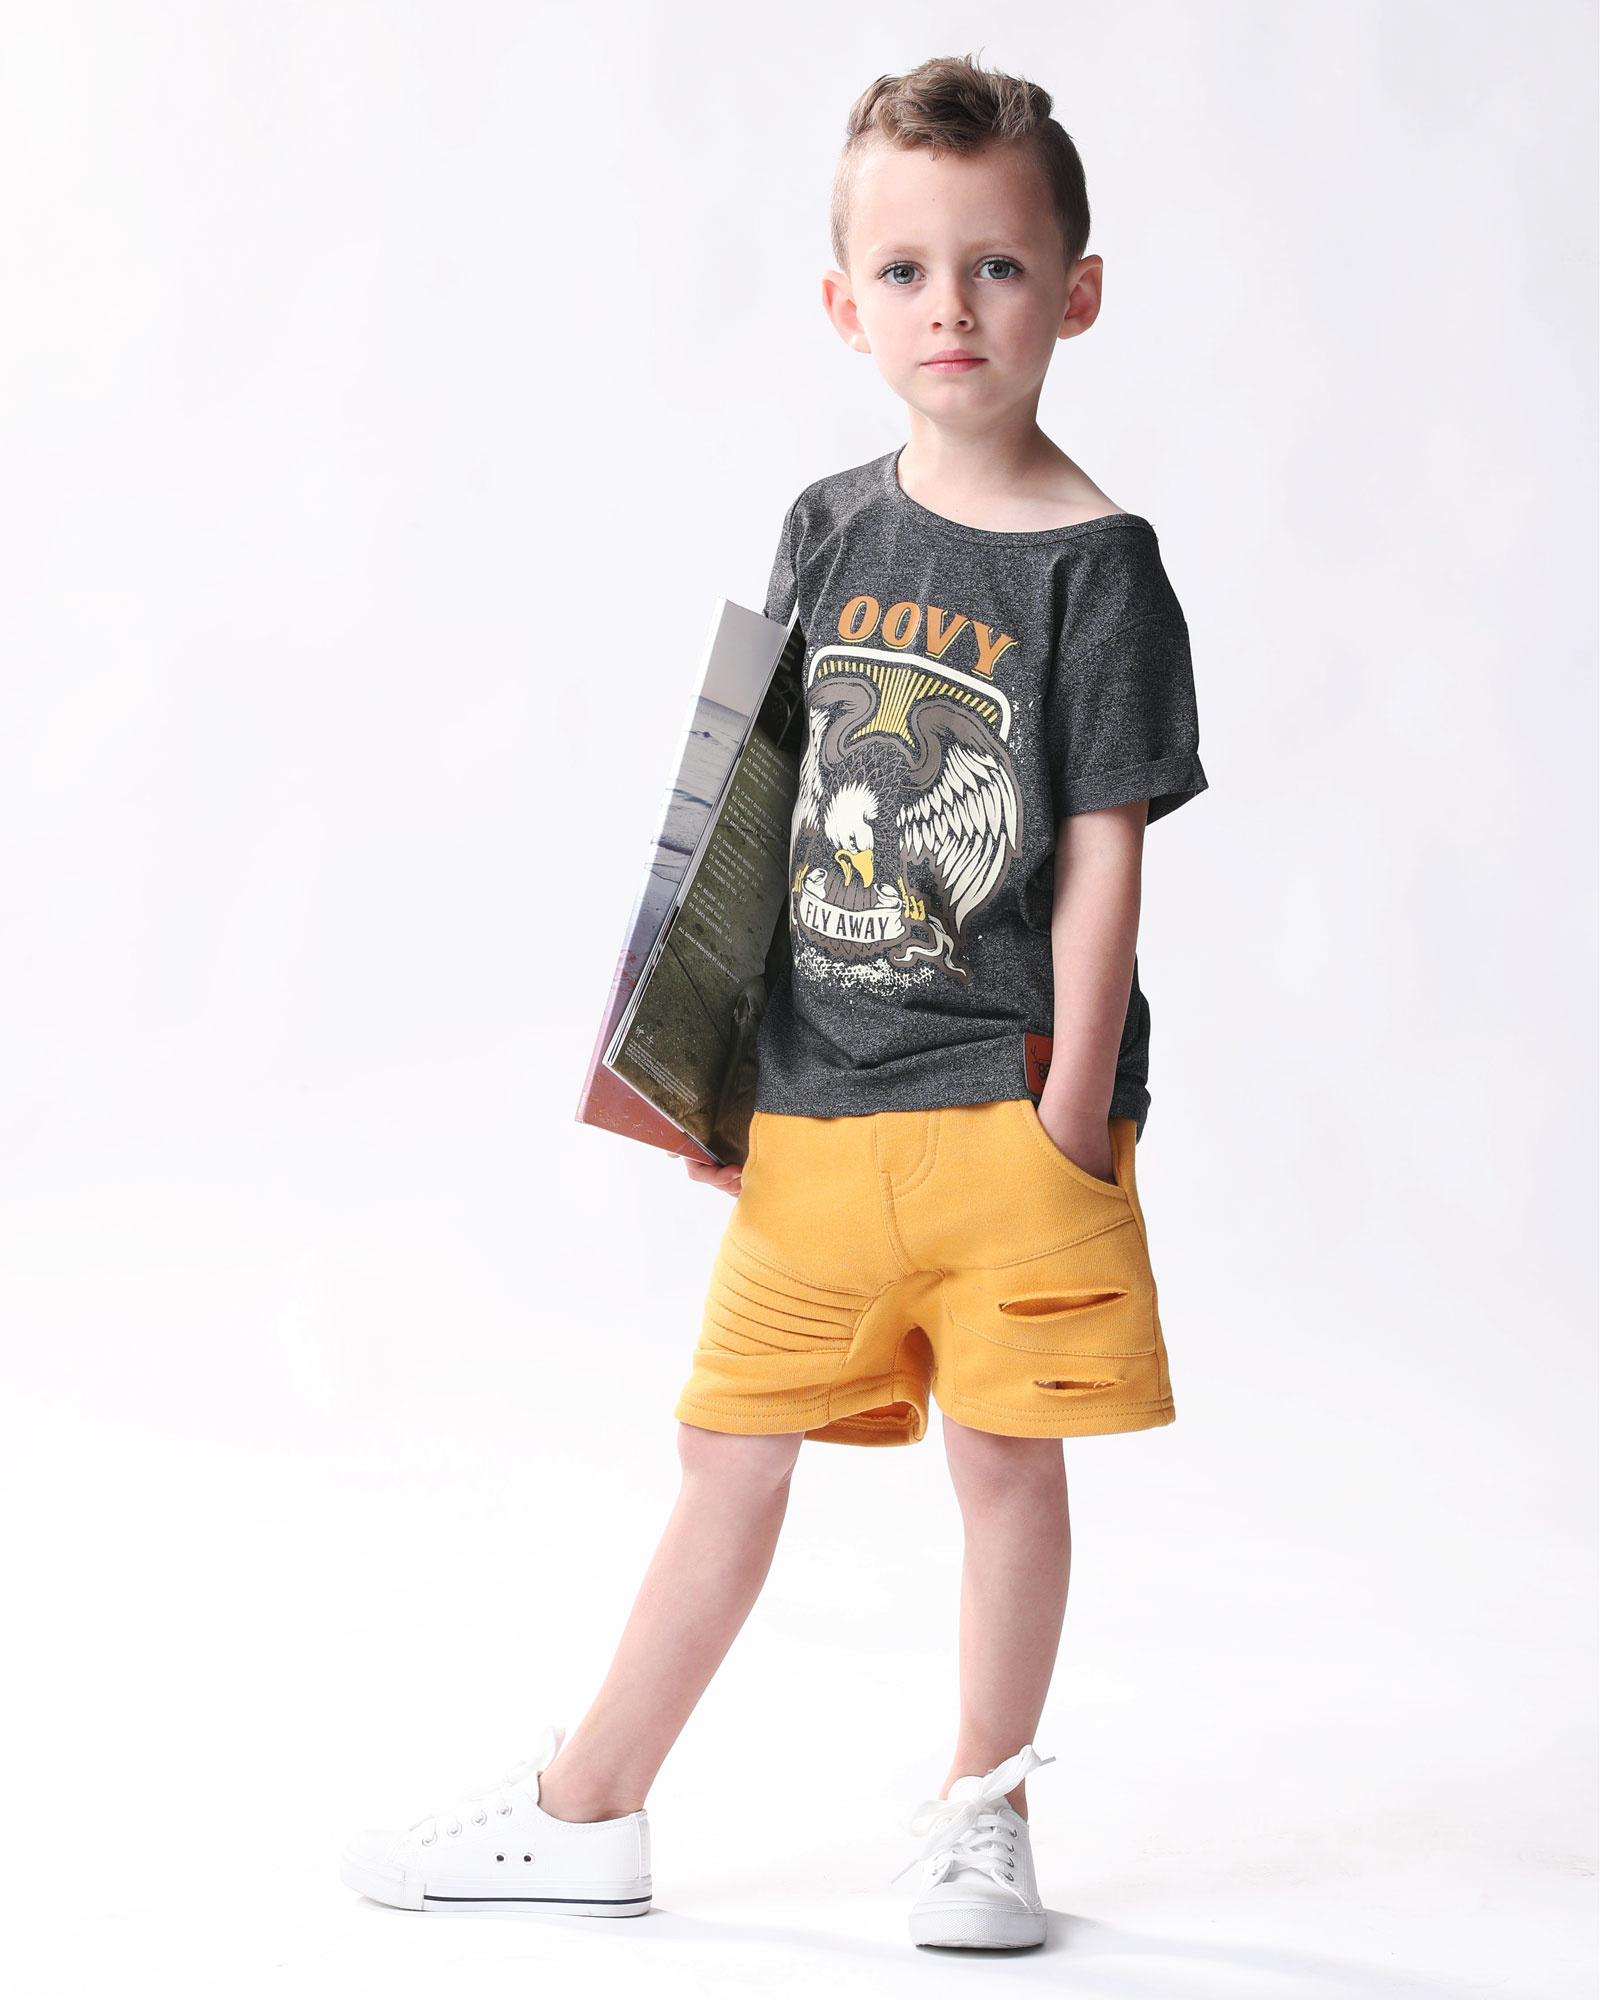 Oovy OCHER SHORTS FOR KIDS | MUSTARD COLORED SHORTS | CHILDREN'S CLOTHING